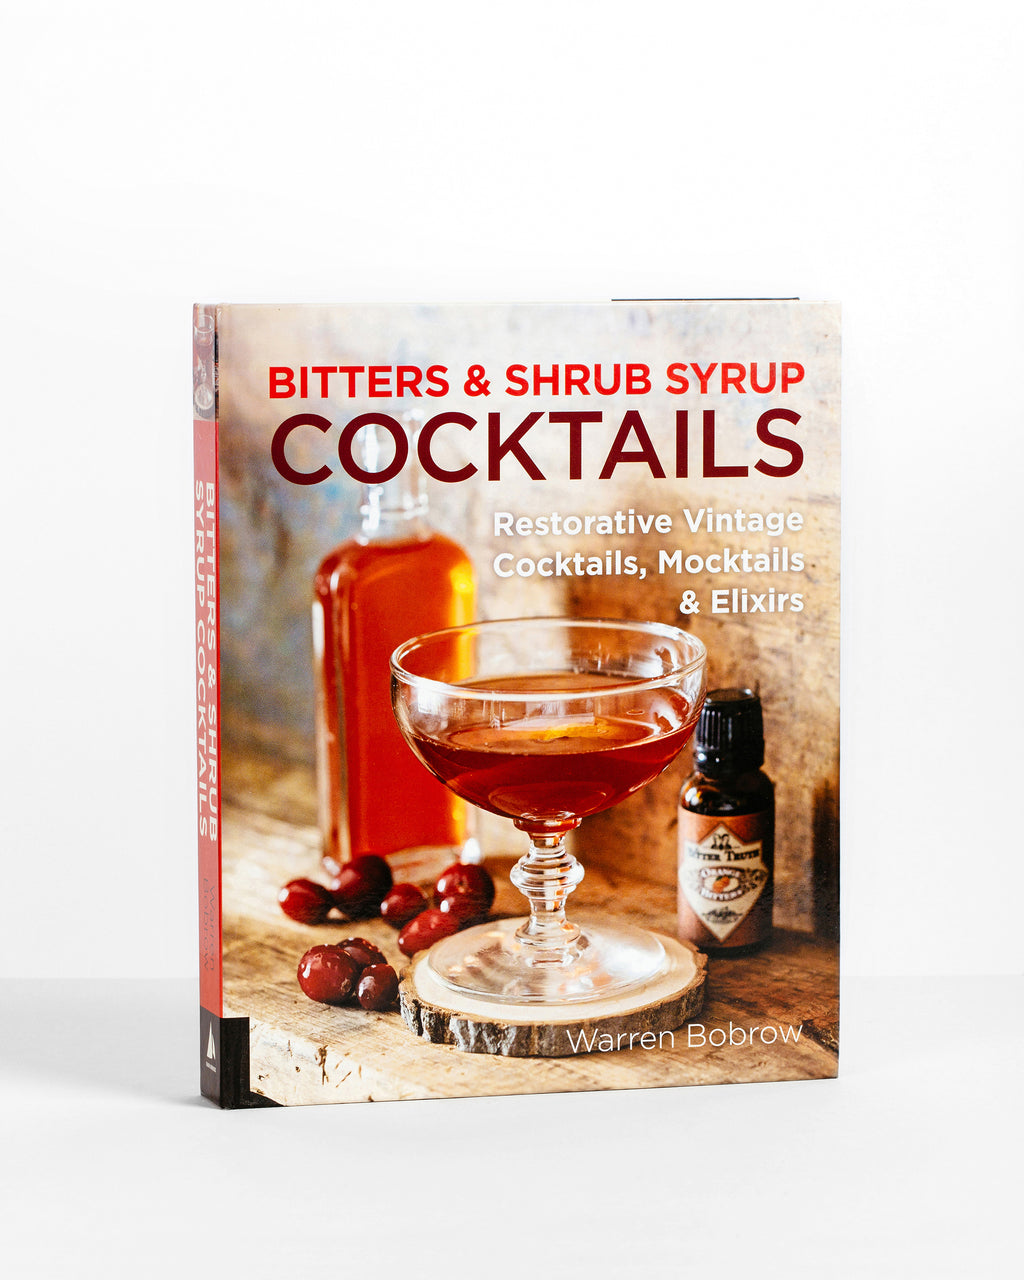 Bitters and Shrub Syrup Cocktails